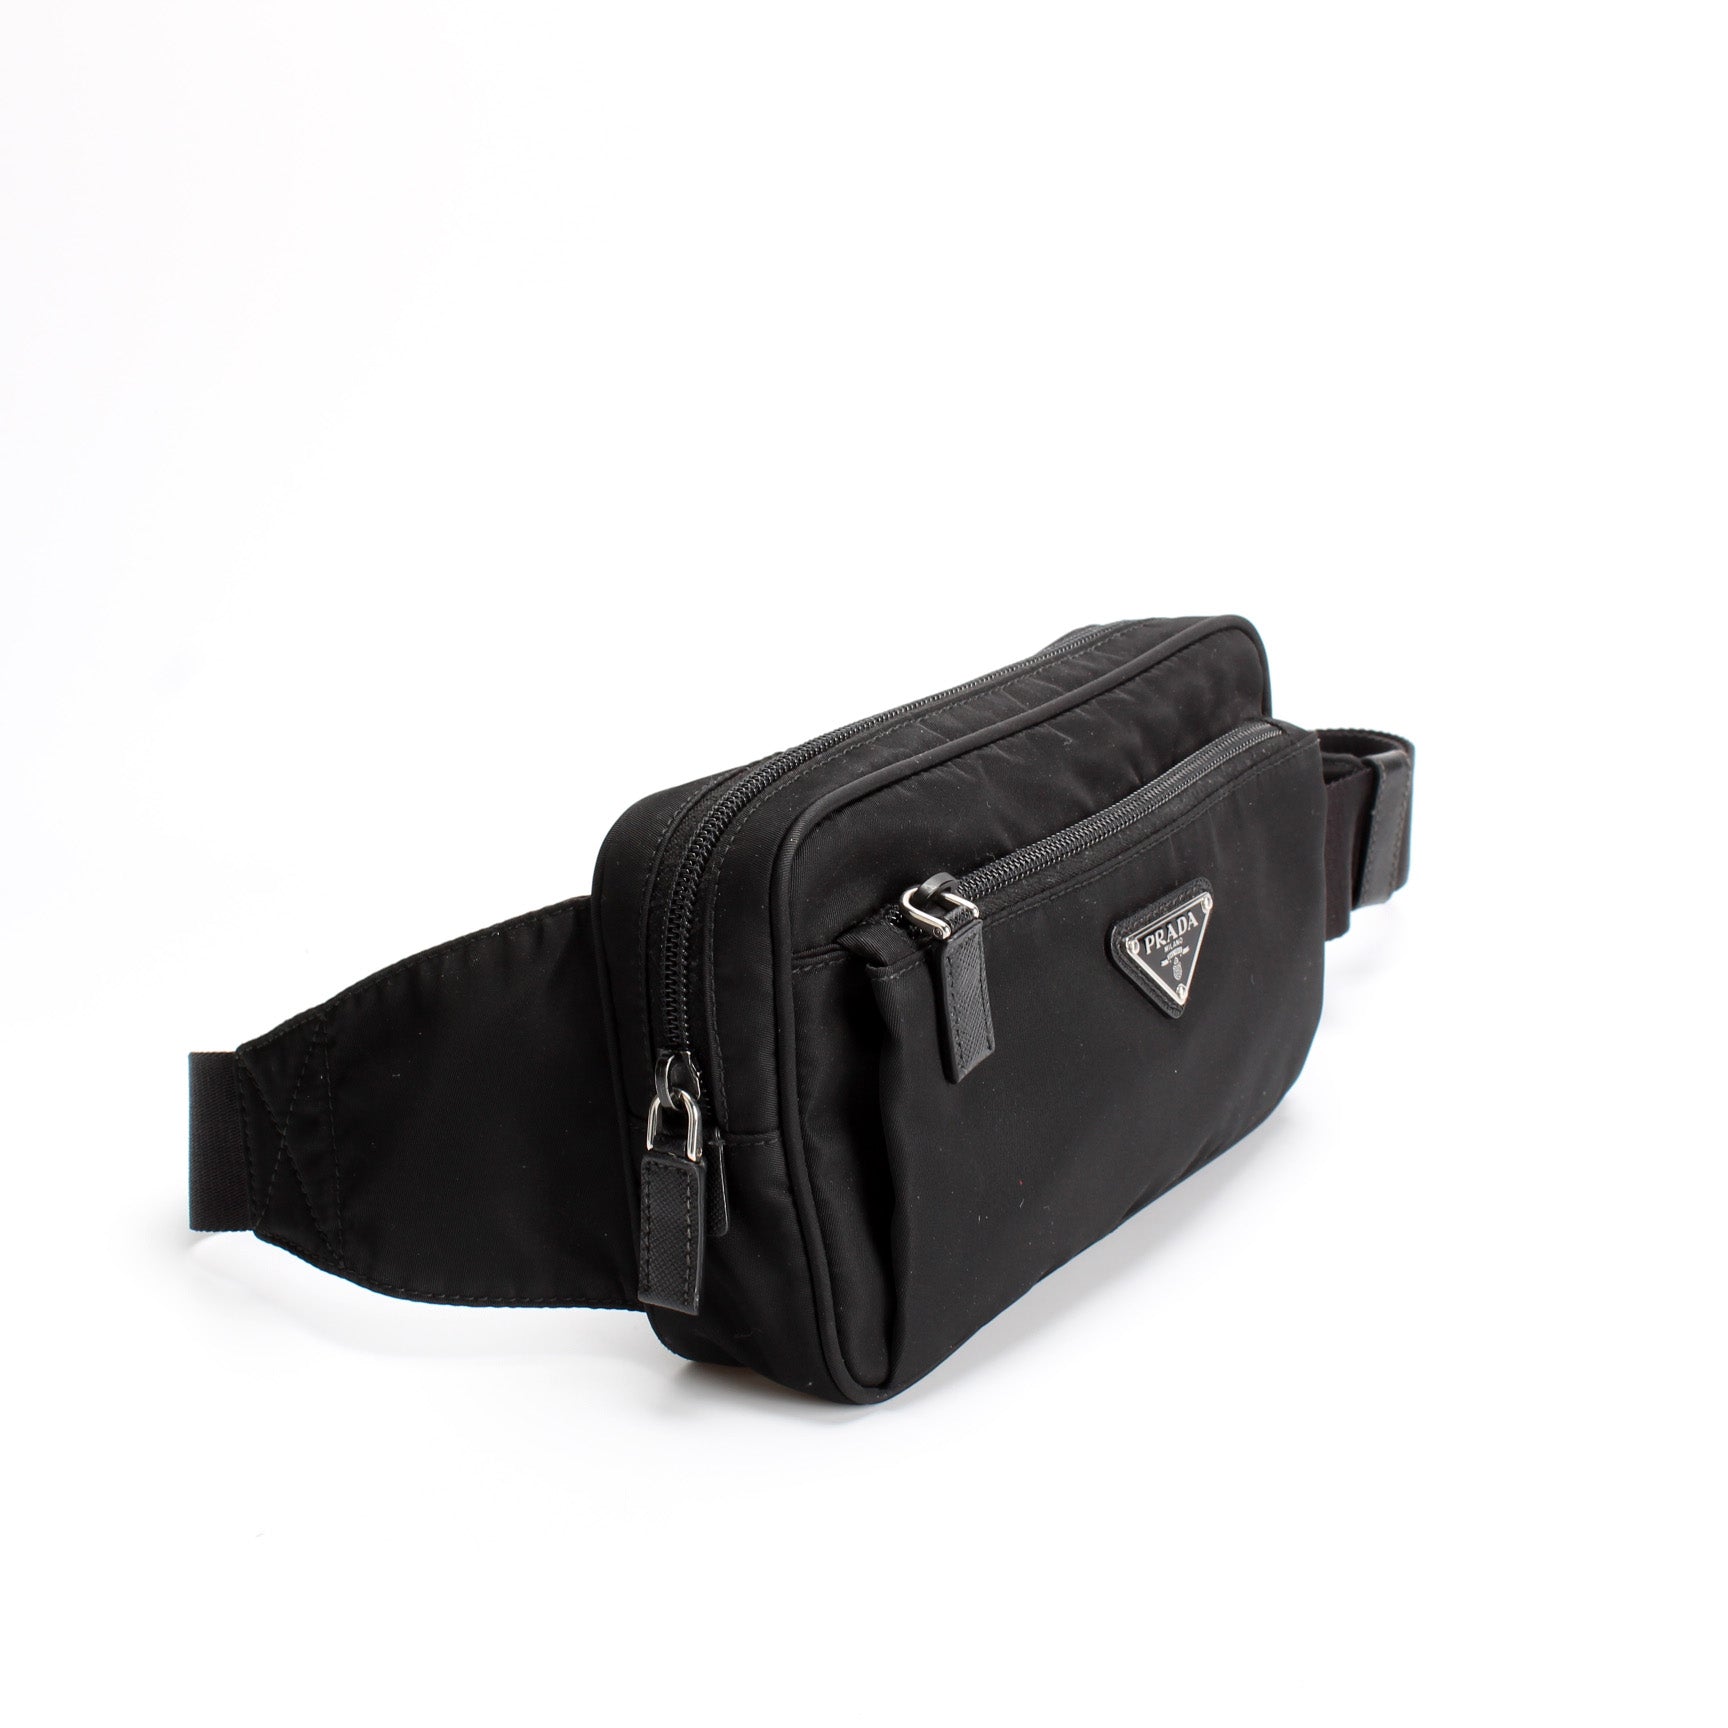 Re-Nylon and Saffiano leather belt bag